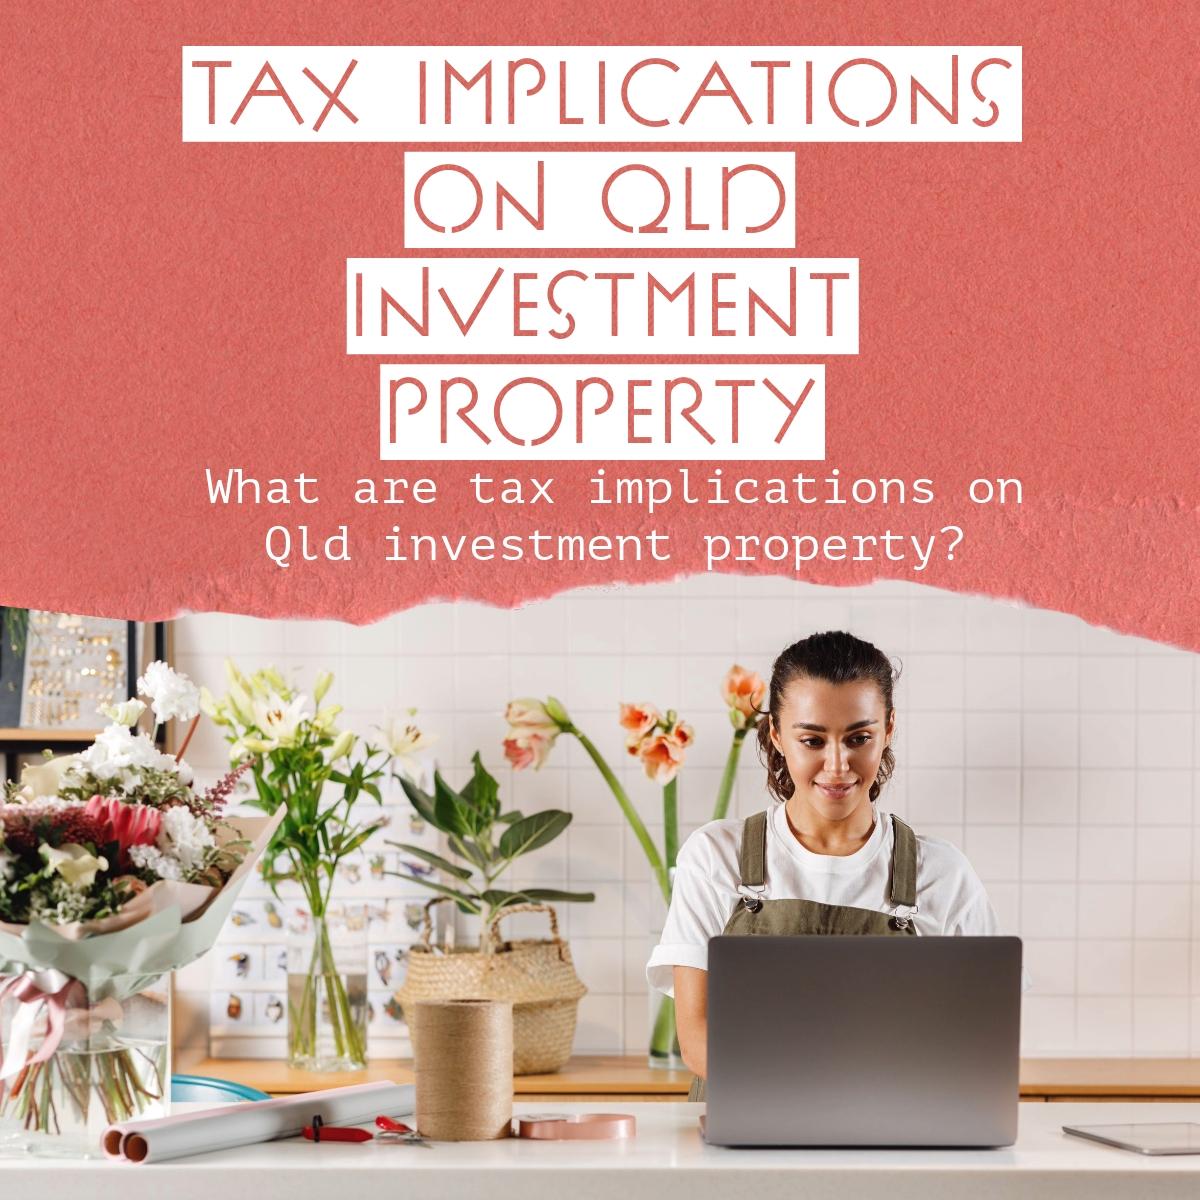 Tax implications on Qld investment property